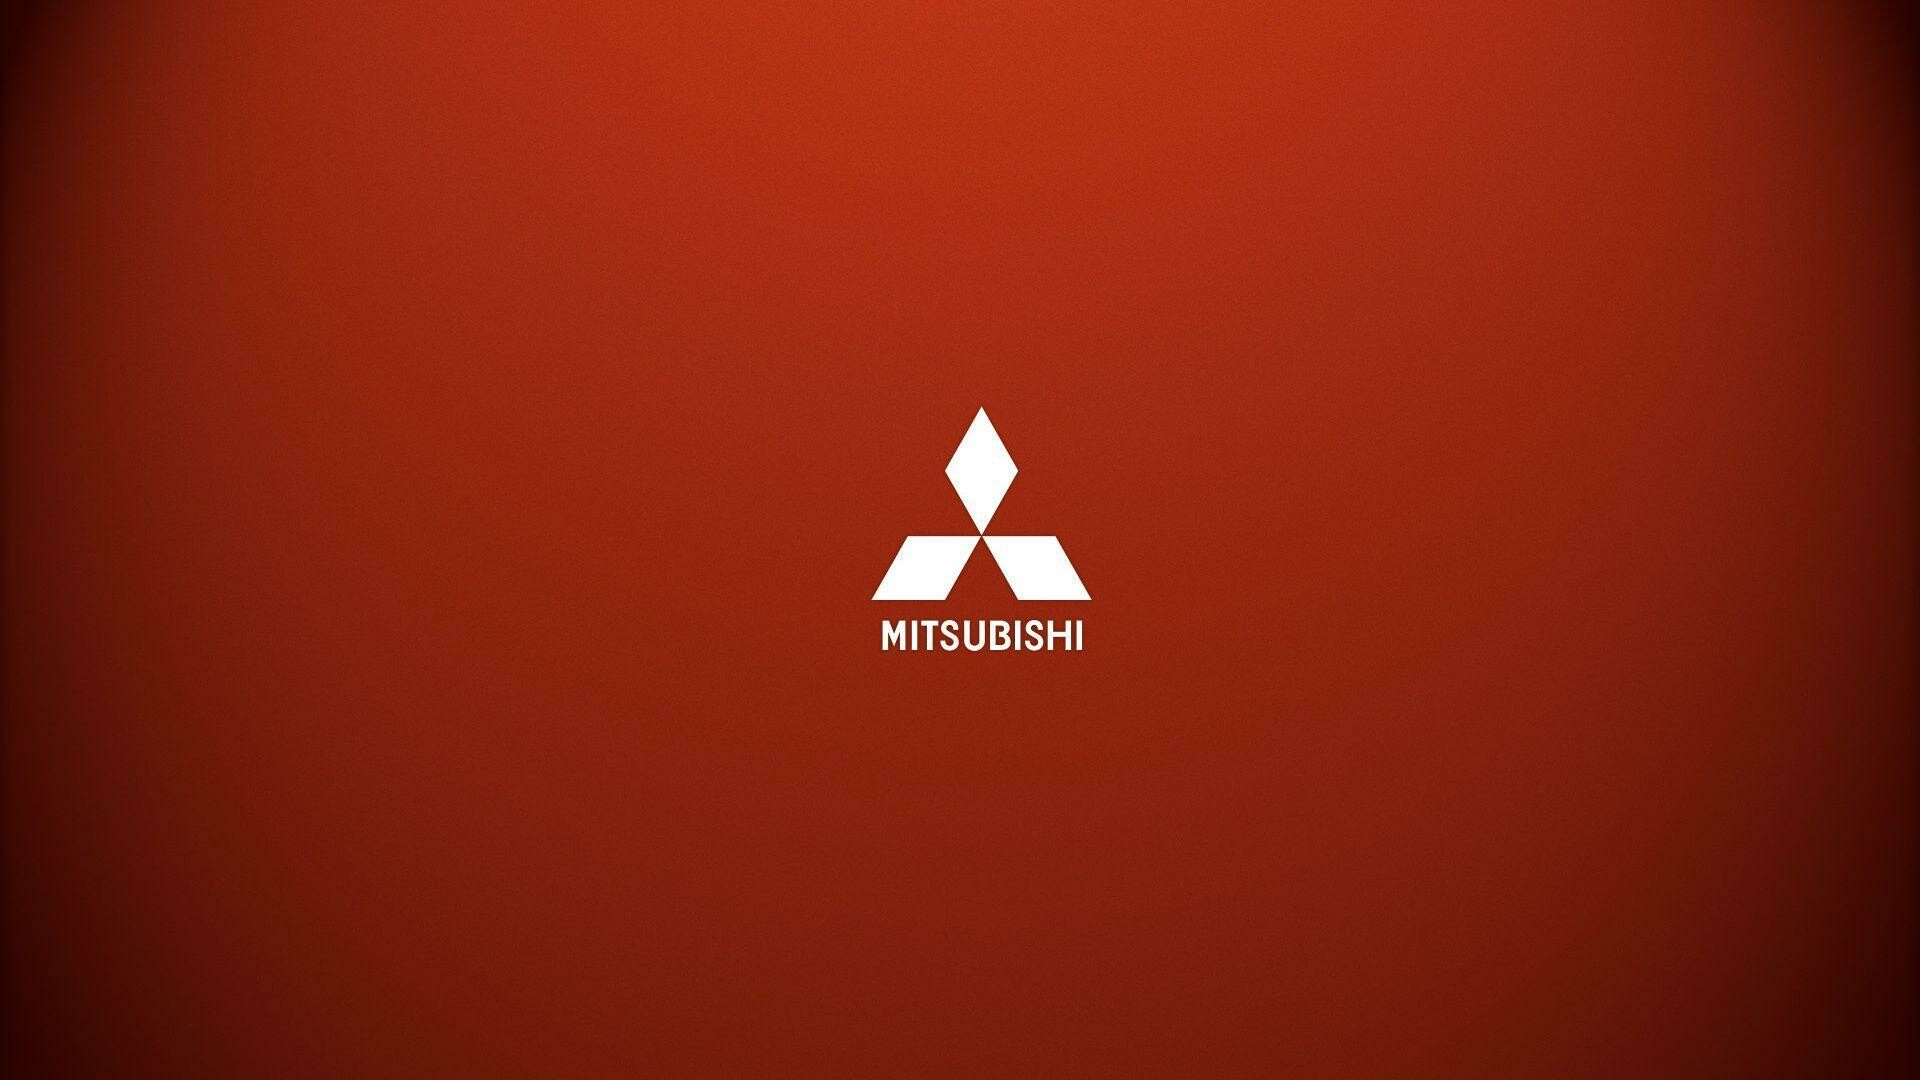 Mitsubishi: One of the world's largest and most recognizable automotive brands, Logo. 1920x1080 Full HD Wallpaper.